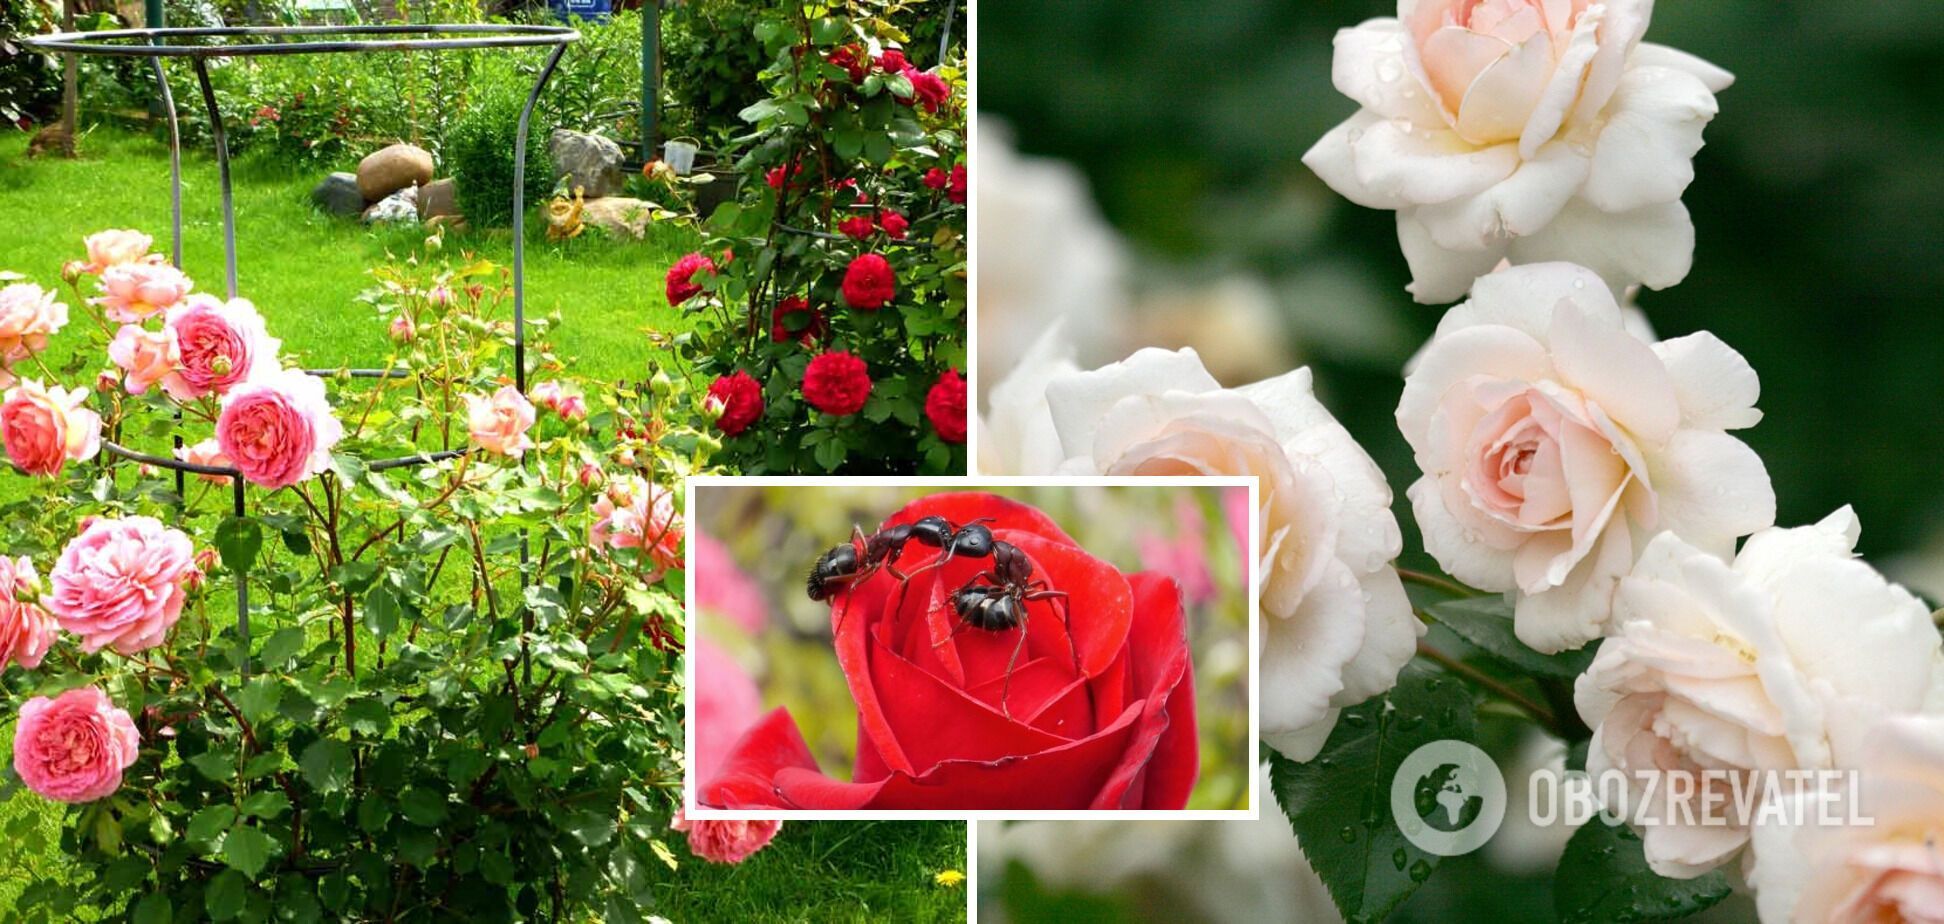 How to get rid of ants on roses: a remedy from the medicine cabinet will help